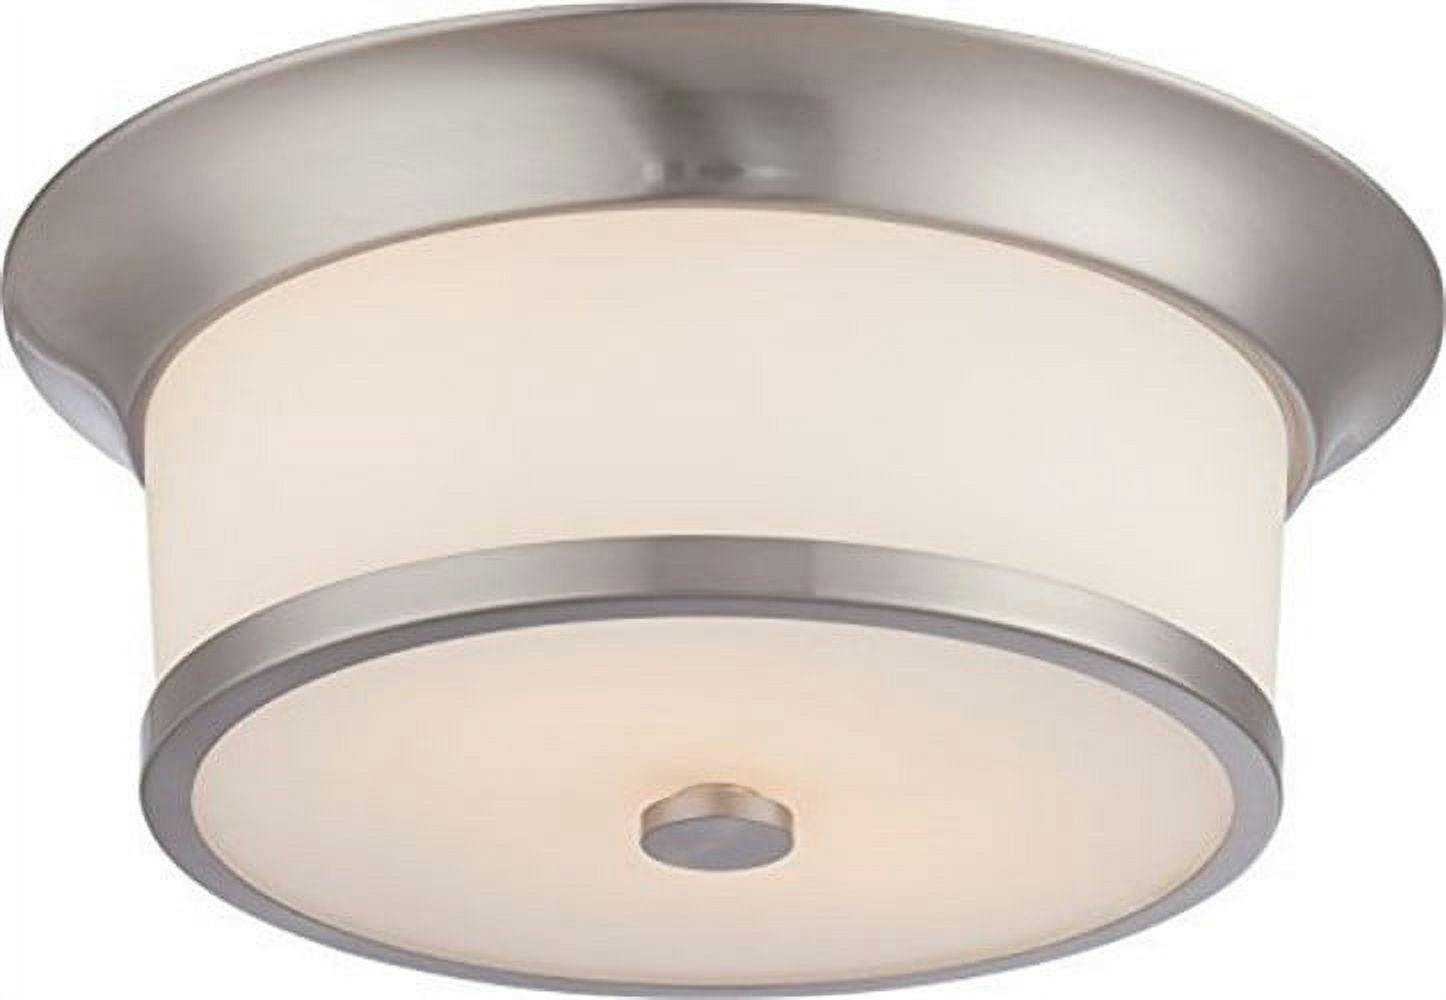 Mobili Contemporary Brushed Nickel 2-Light Flush Mount with Satin White Glass